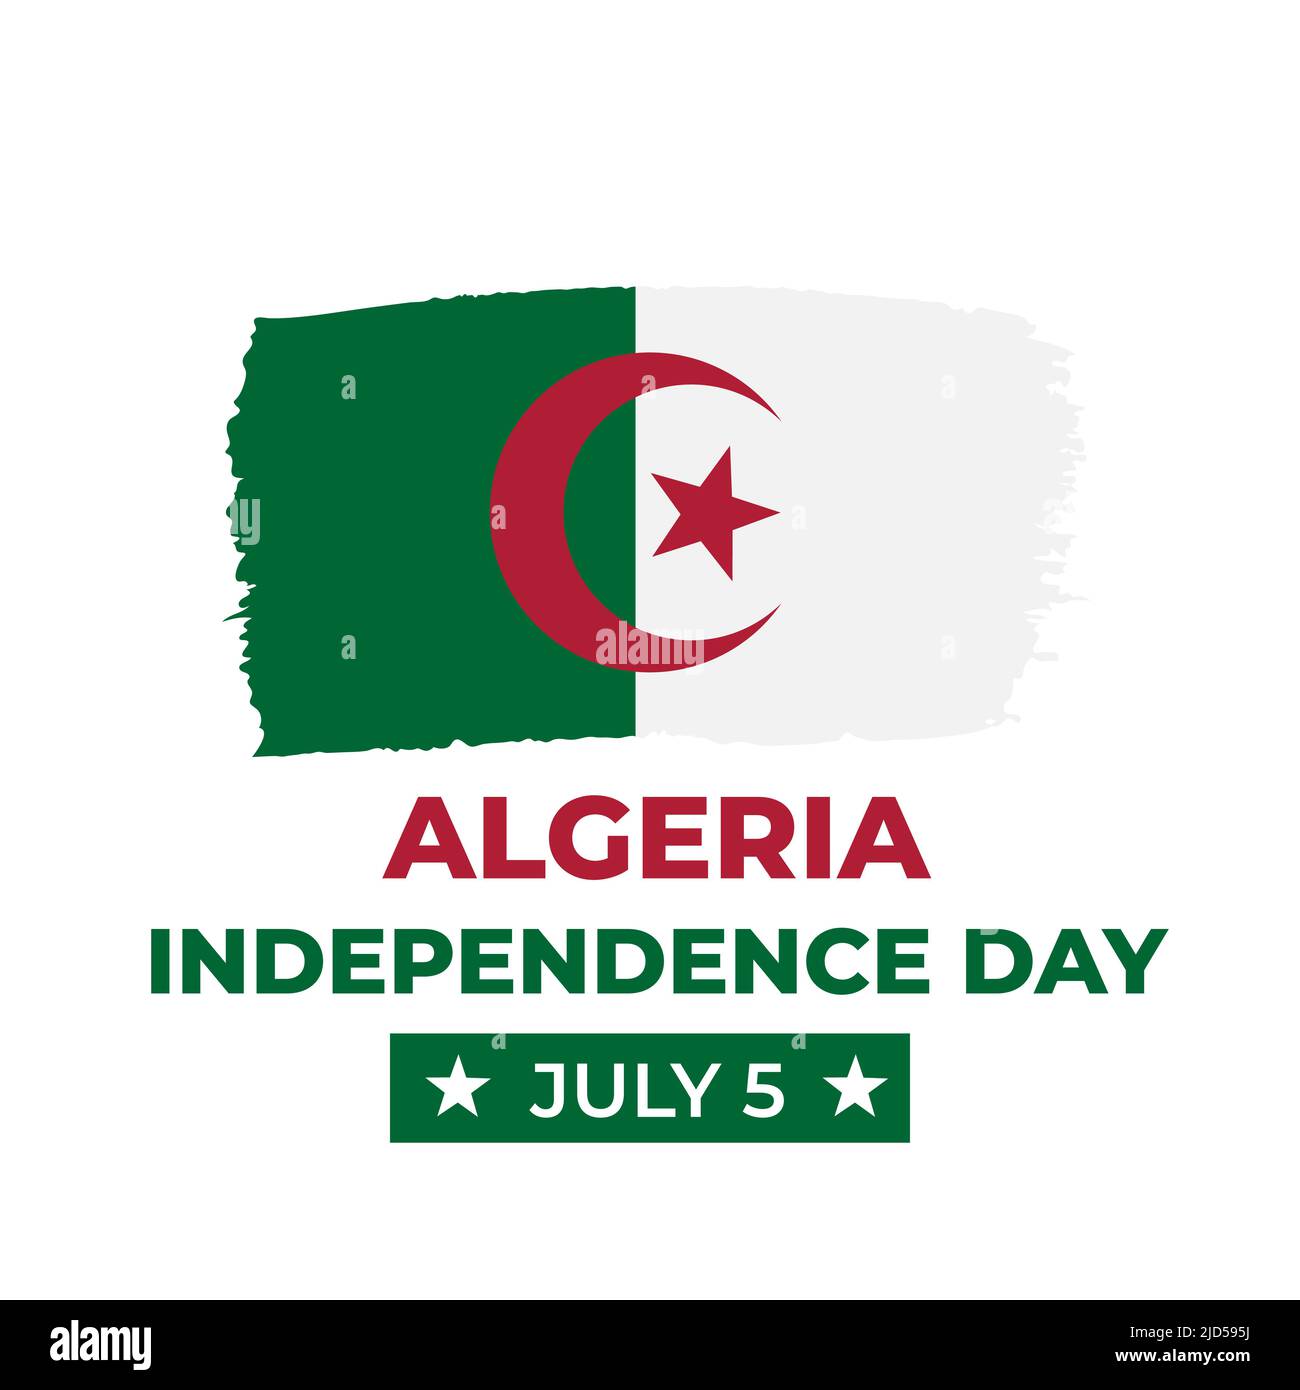 Algeria Independence Day banner. National holiday celebrate on July 5. Vector template for poster, flyer, sticker, greeting card, postcard, etc. Stock Vector